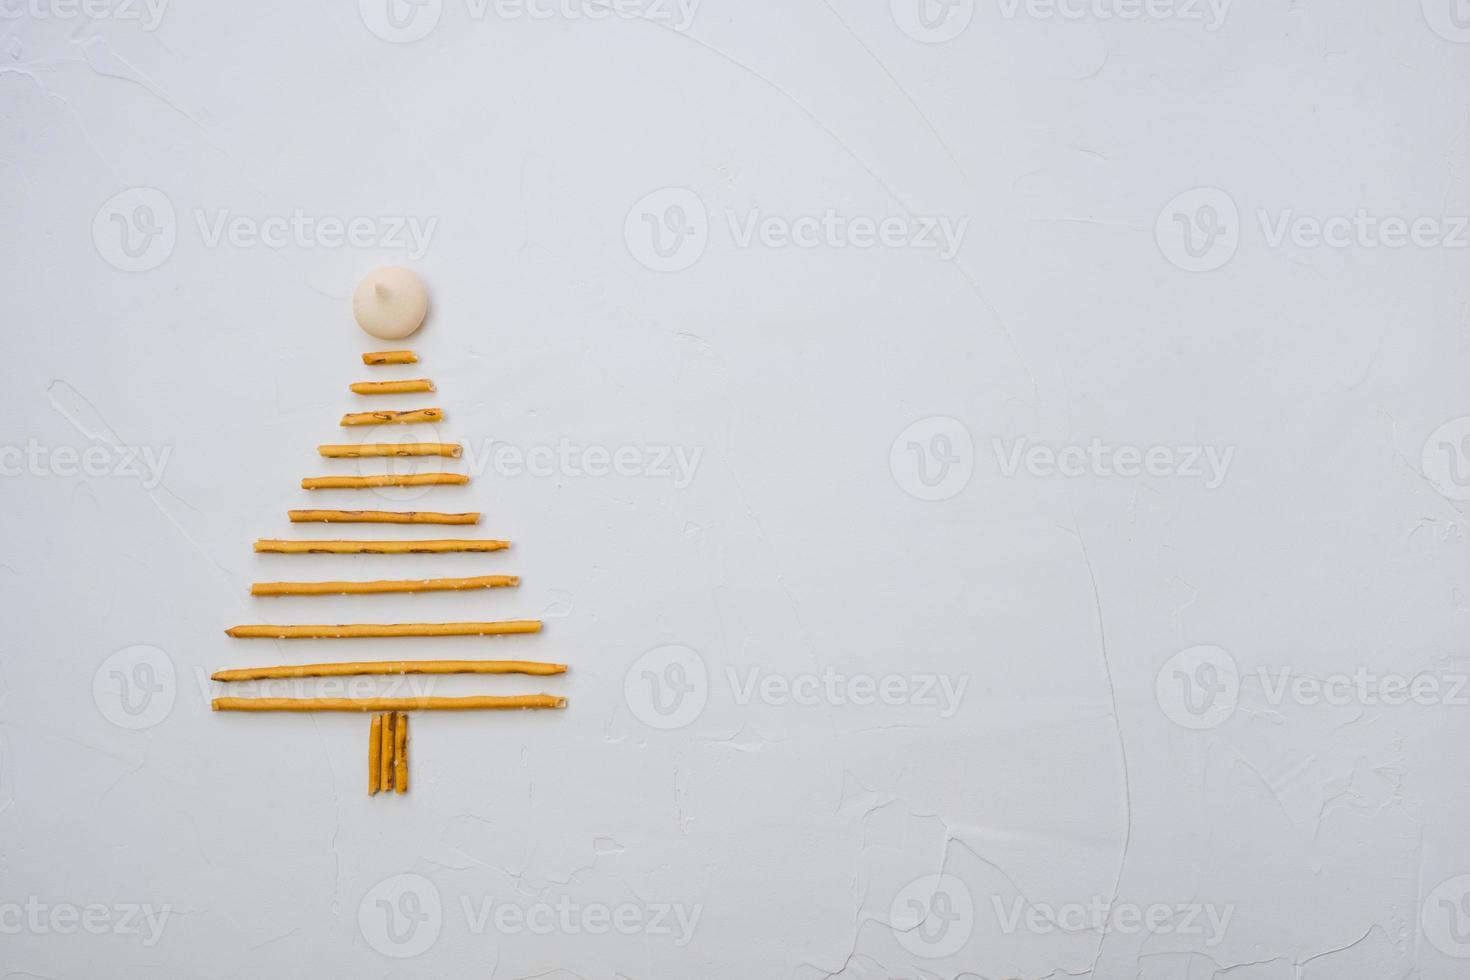 Christmas tree made from pepero straws cookies, on white background texture. Top view with space for text on the right photo